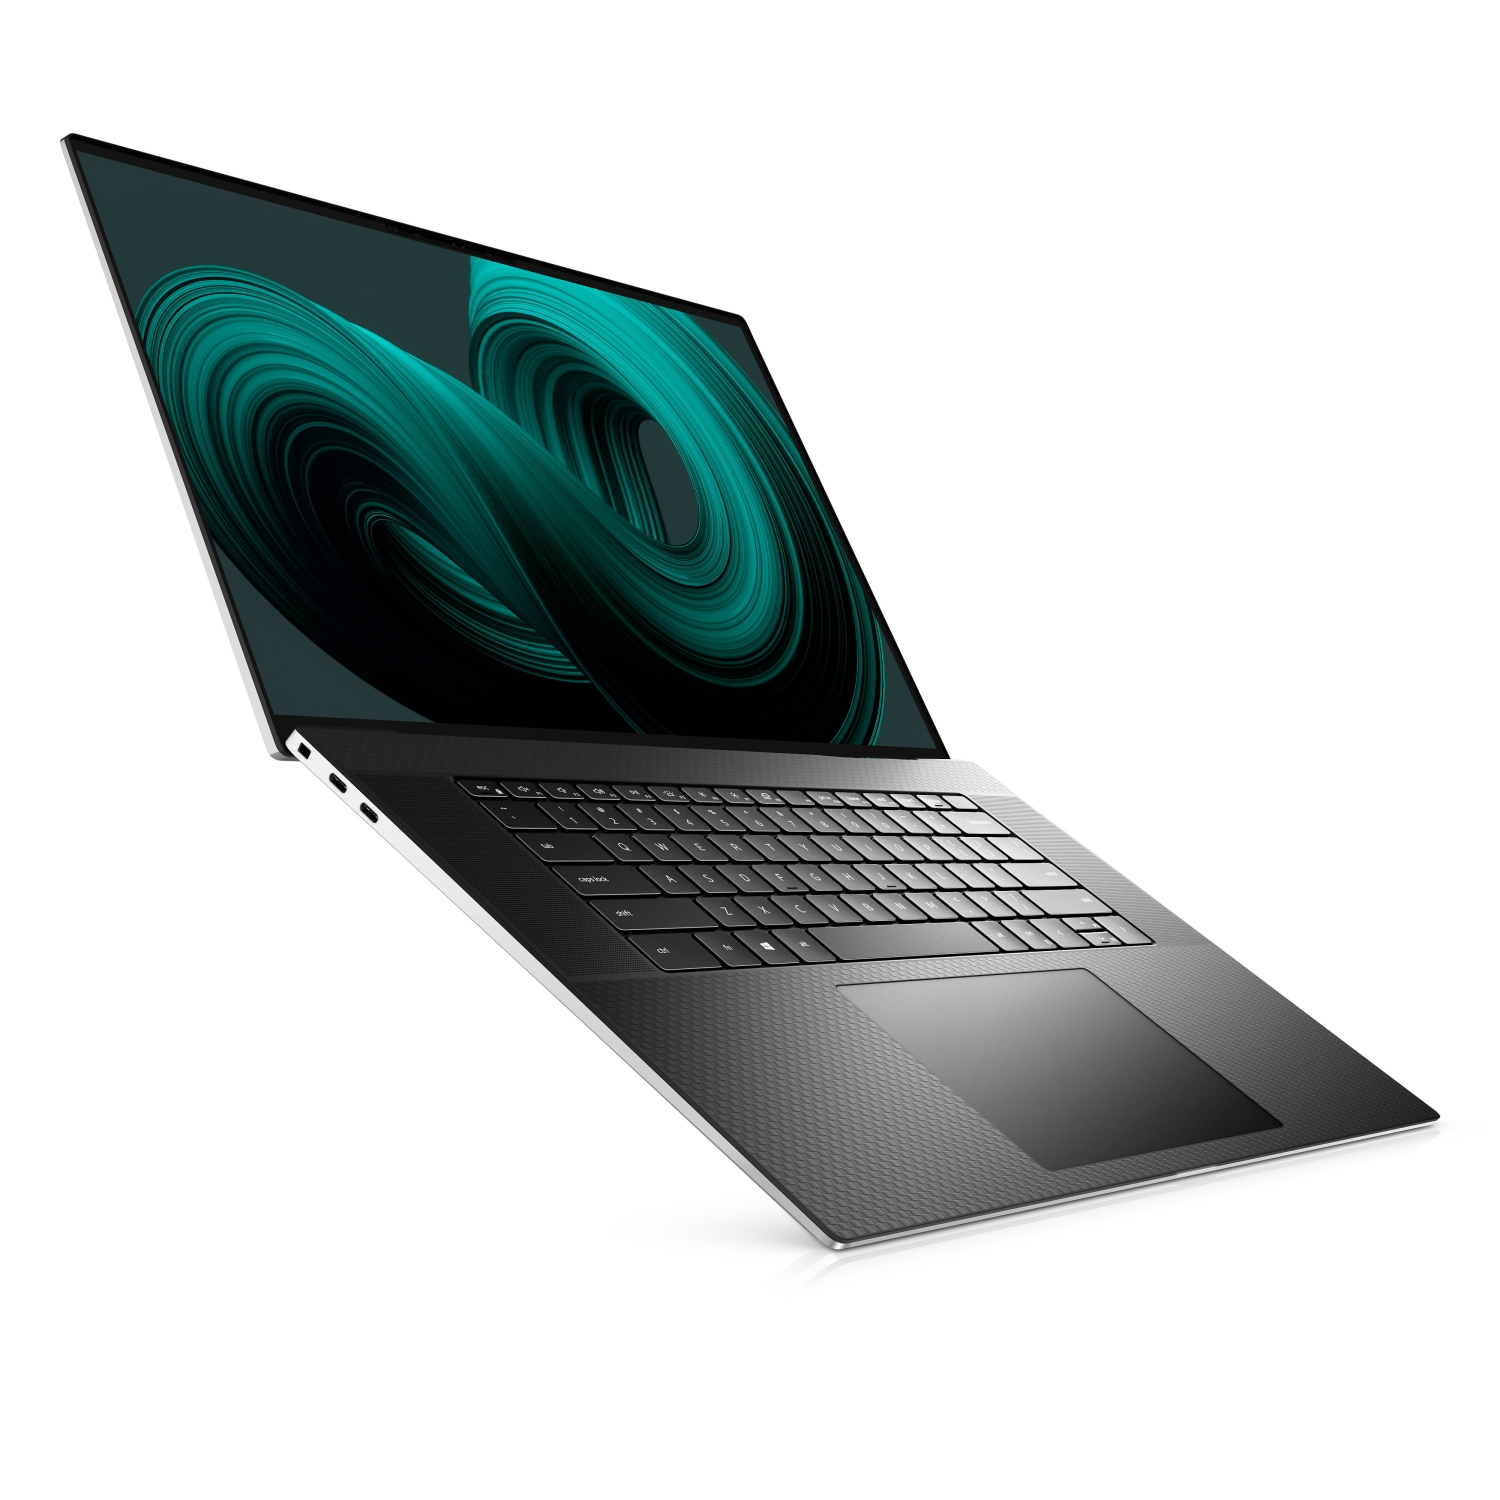 Refurbished (Excellent) - Dell XPS 17 9710 Laptop (2021) | 17" 4K Touch | Core i9 - 2TB SSD - 32GB RAM - RTX 3060 | 8 Cores @ 5 GHz - 11th Gen CPU Certified Refurbished